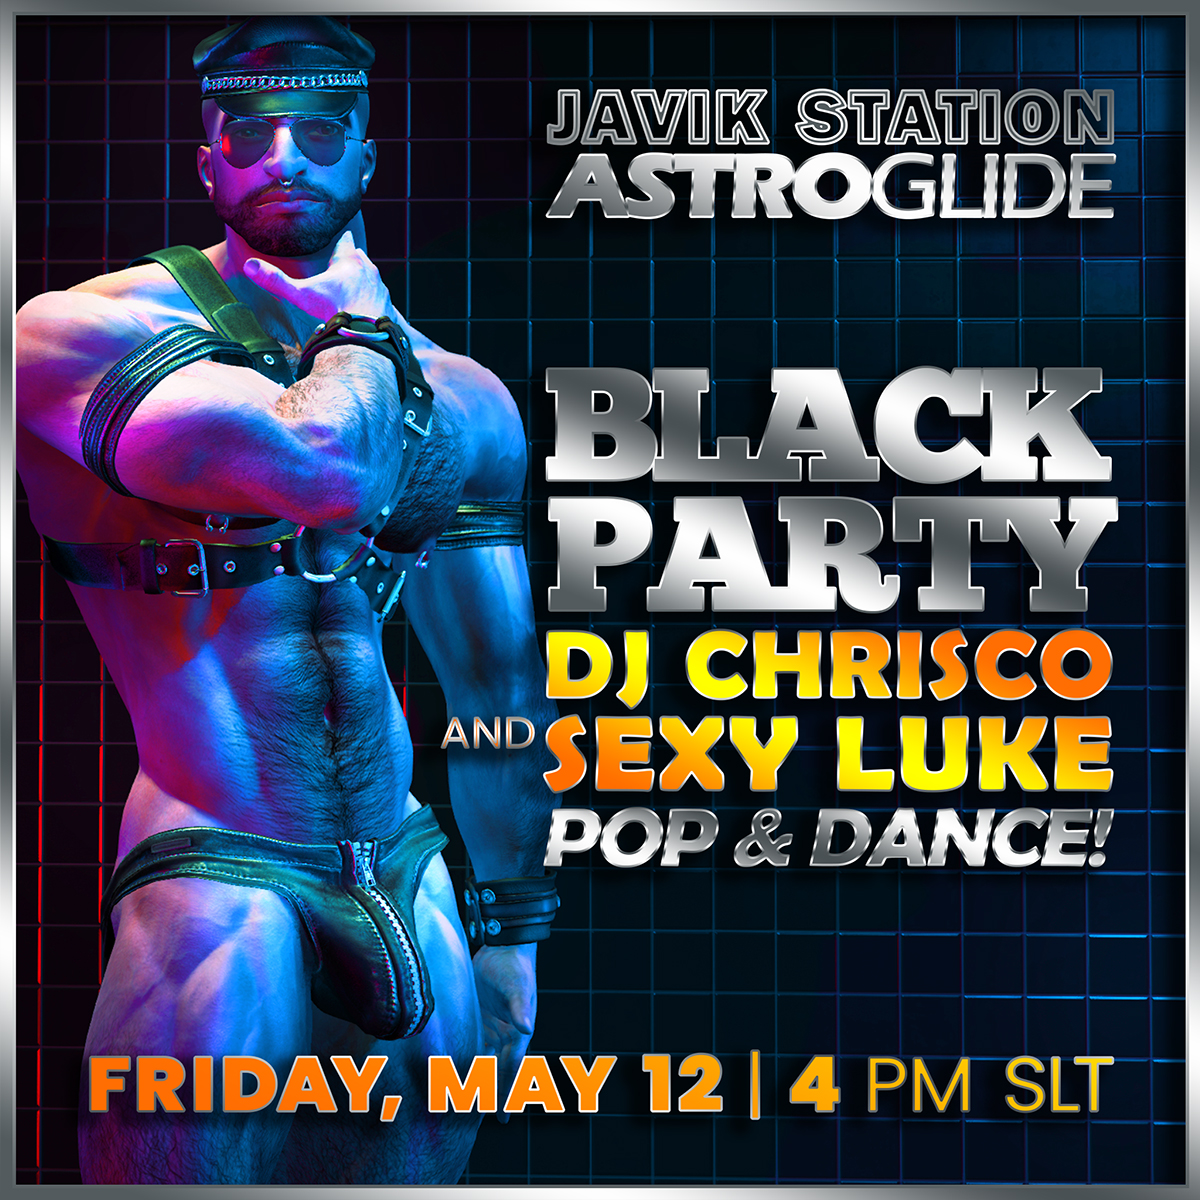 FRIDAY: ASTROGLIDE BLACK PARTY with DJ CHRISCO!